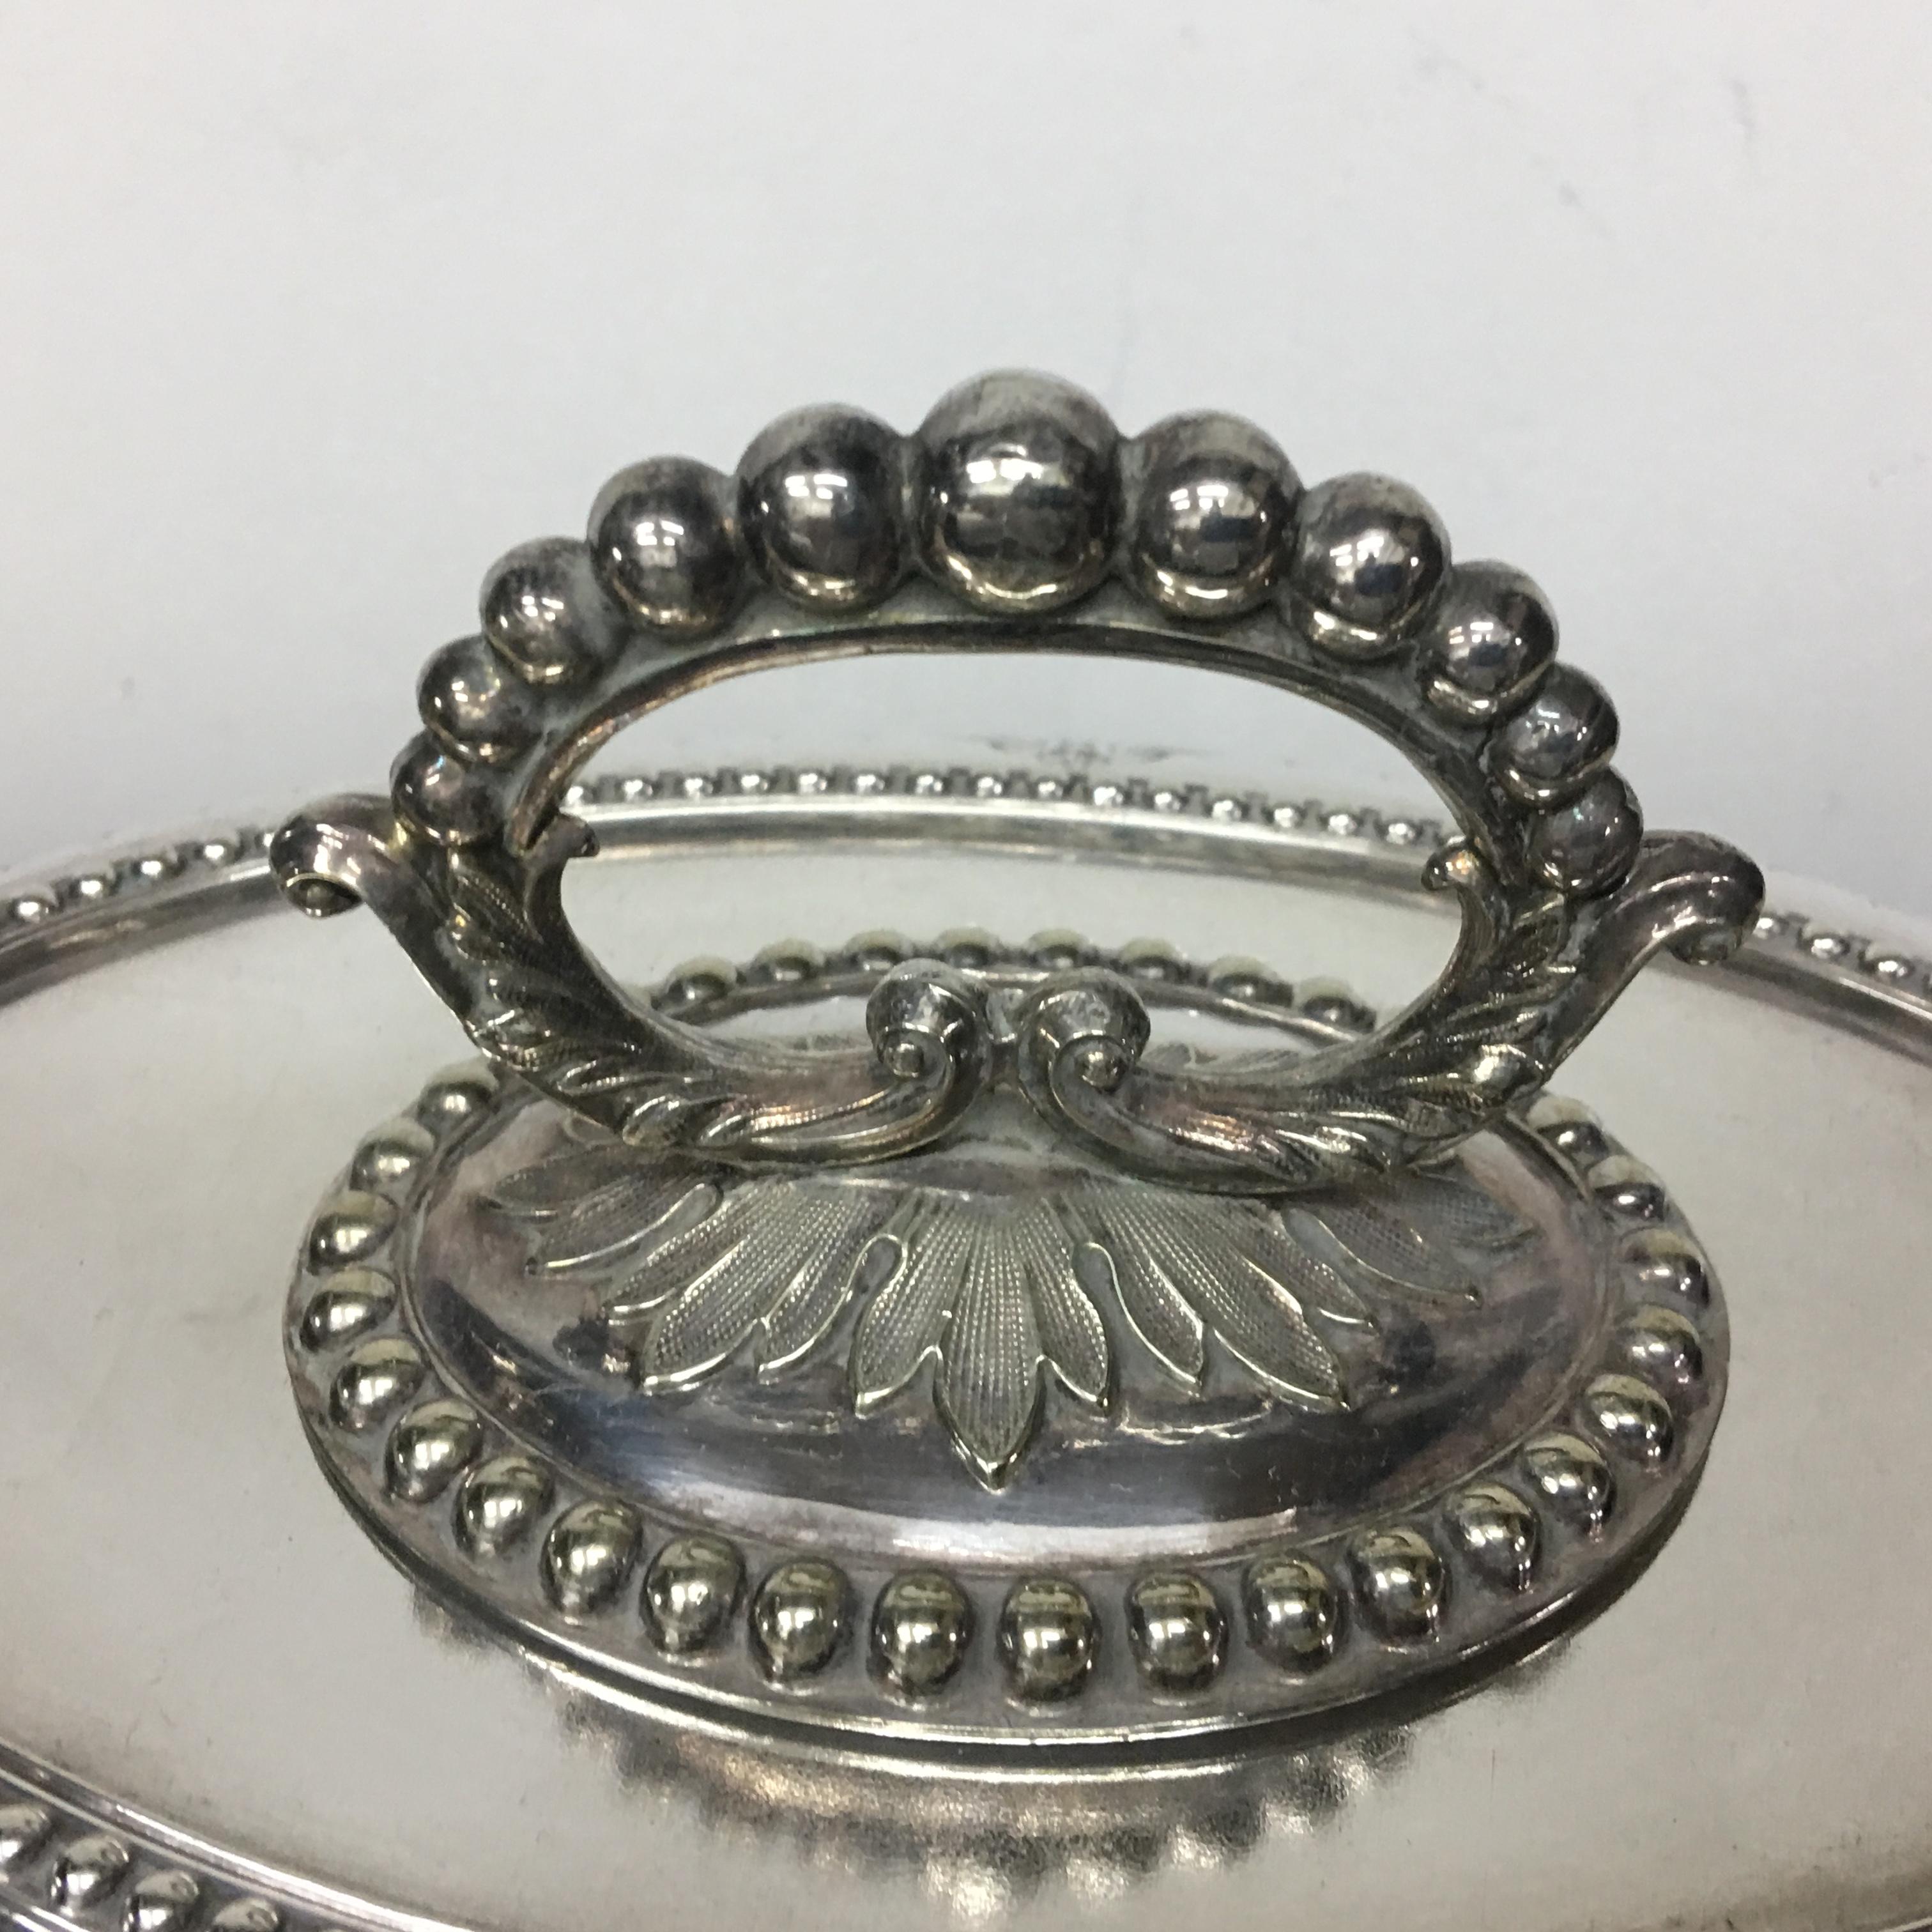 Particular English silver plated entree dish. It is composed of two distinct pieces: the lower part serves as a container for hot water and dish to keep food warm, while the upper part is shaped like a lid to cover everything.
The beaded border is